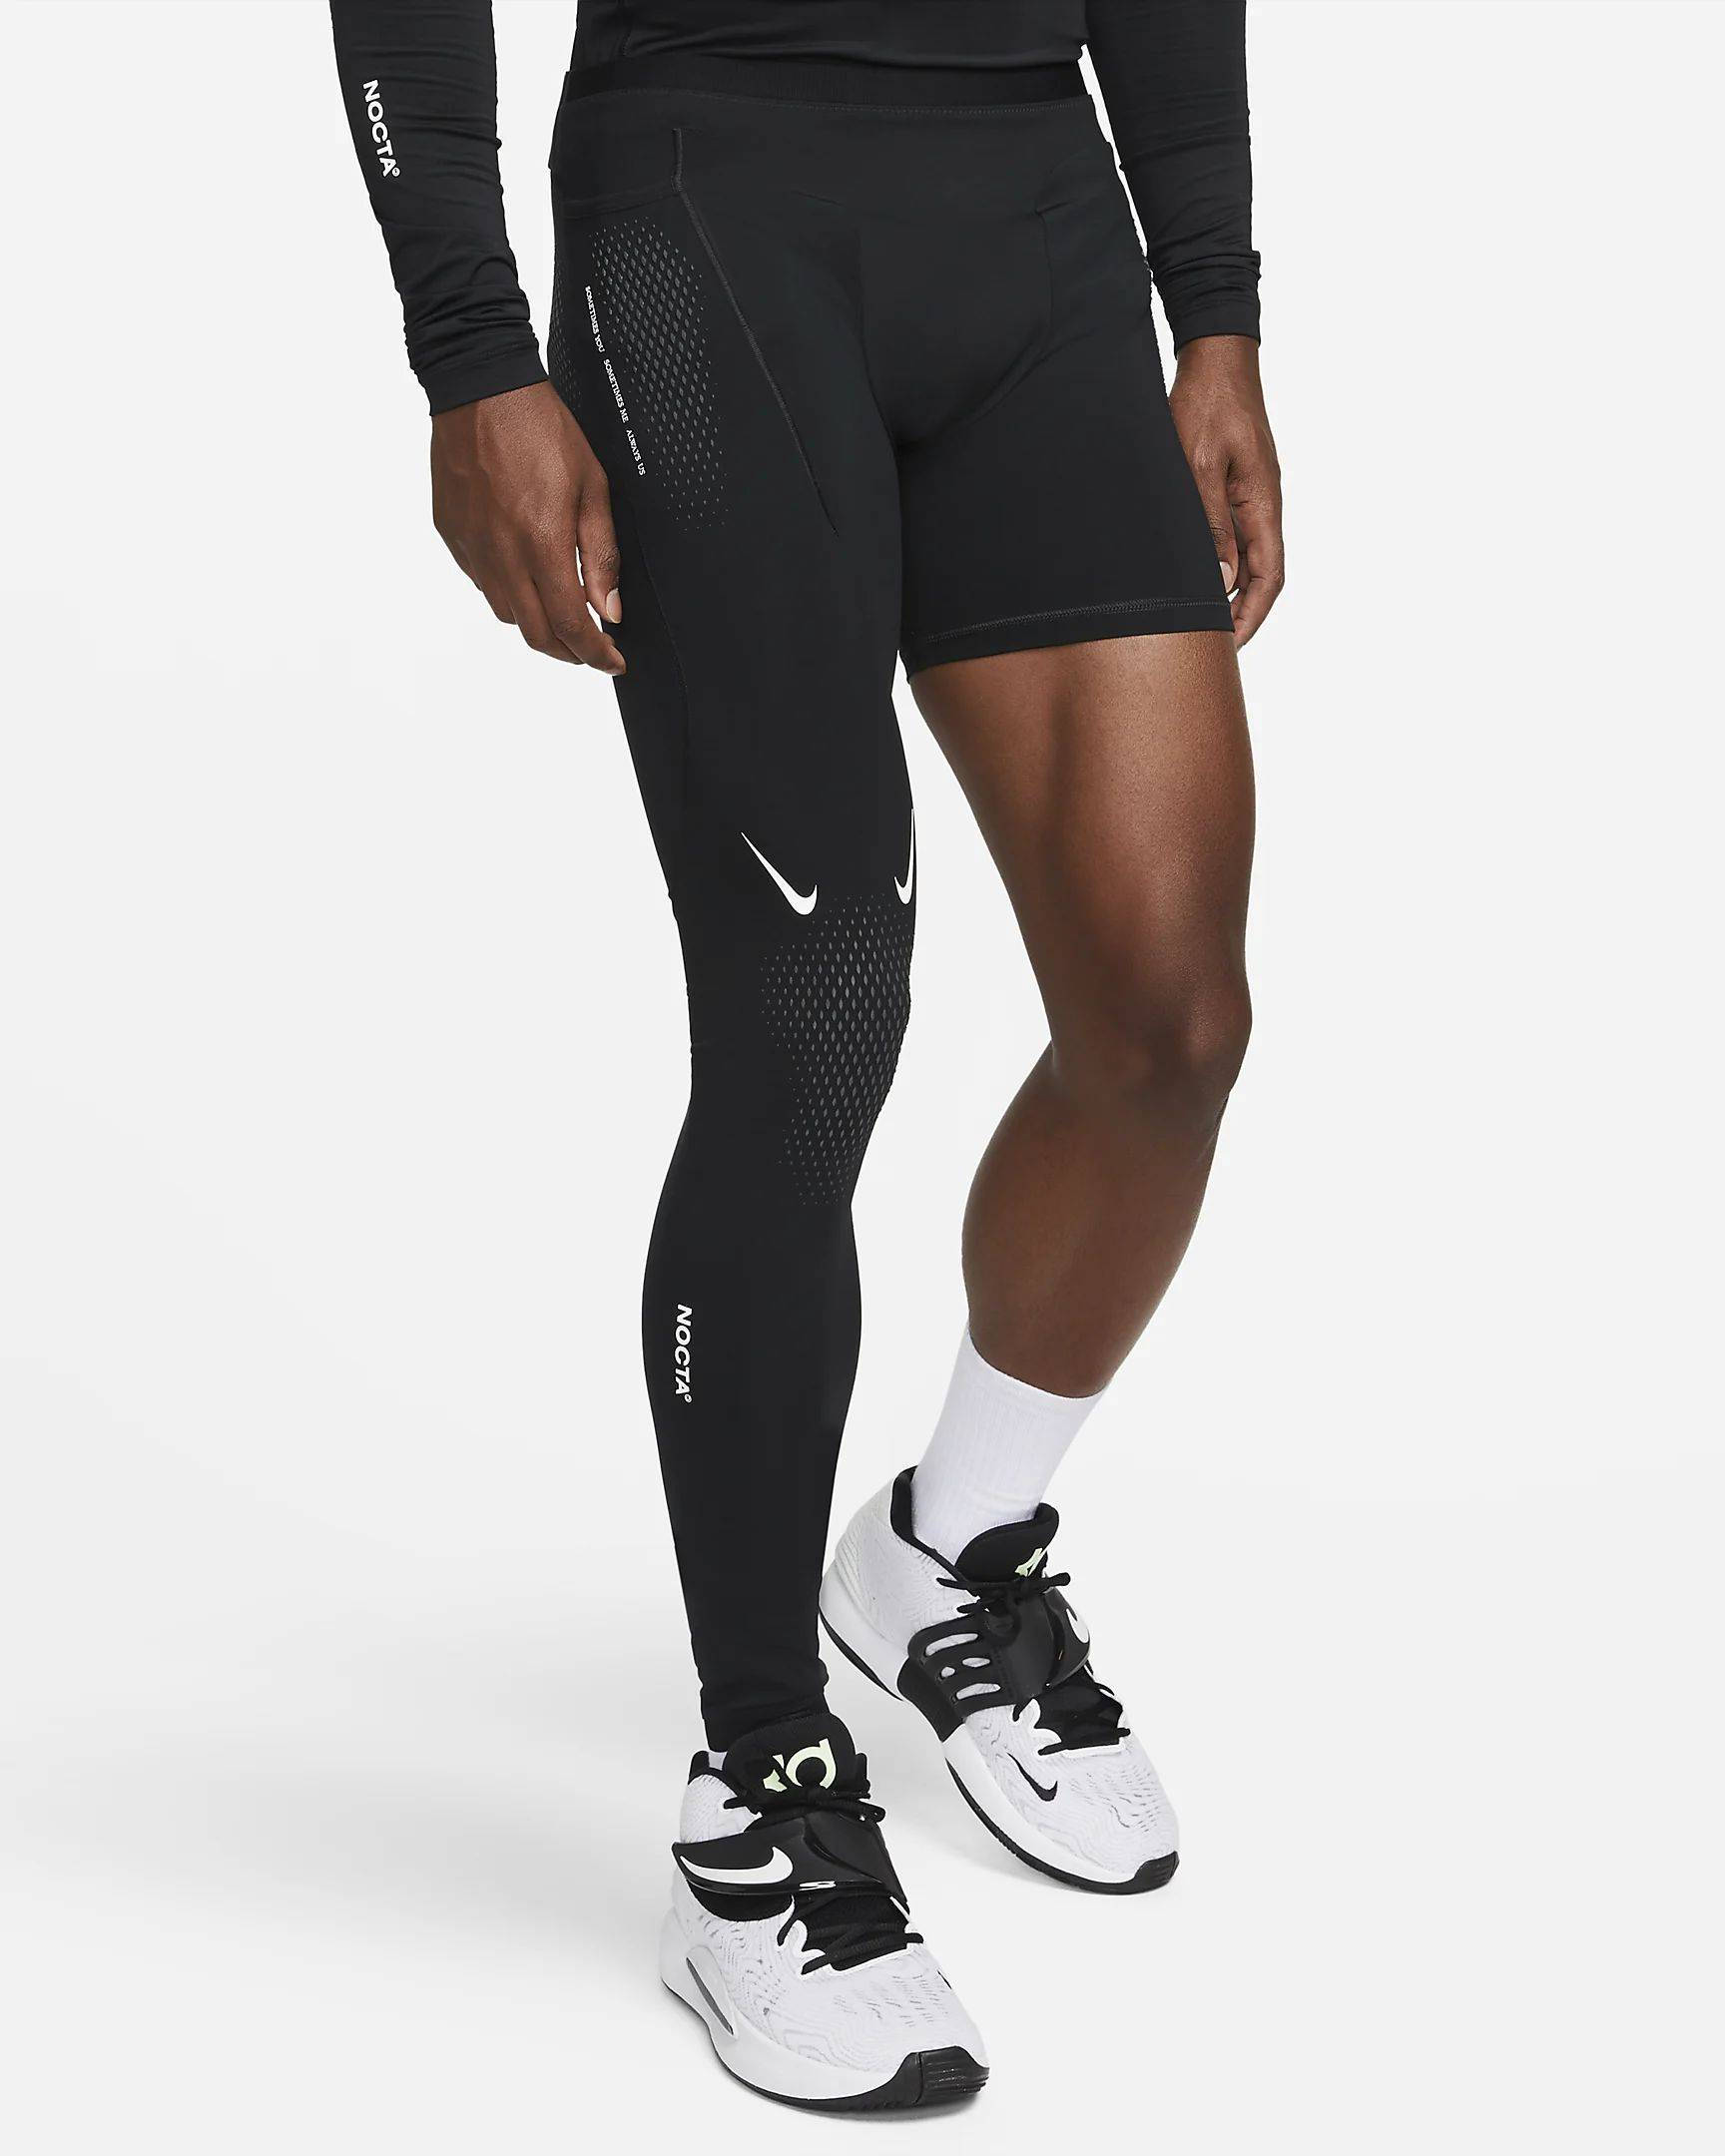 Nike NOCTA Single Leg Tights Right, Where To Buy, DN0003-010